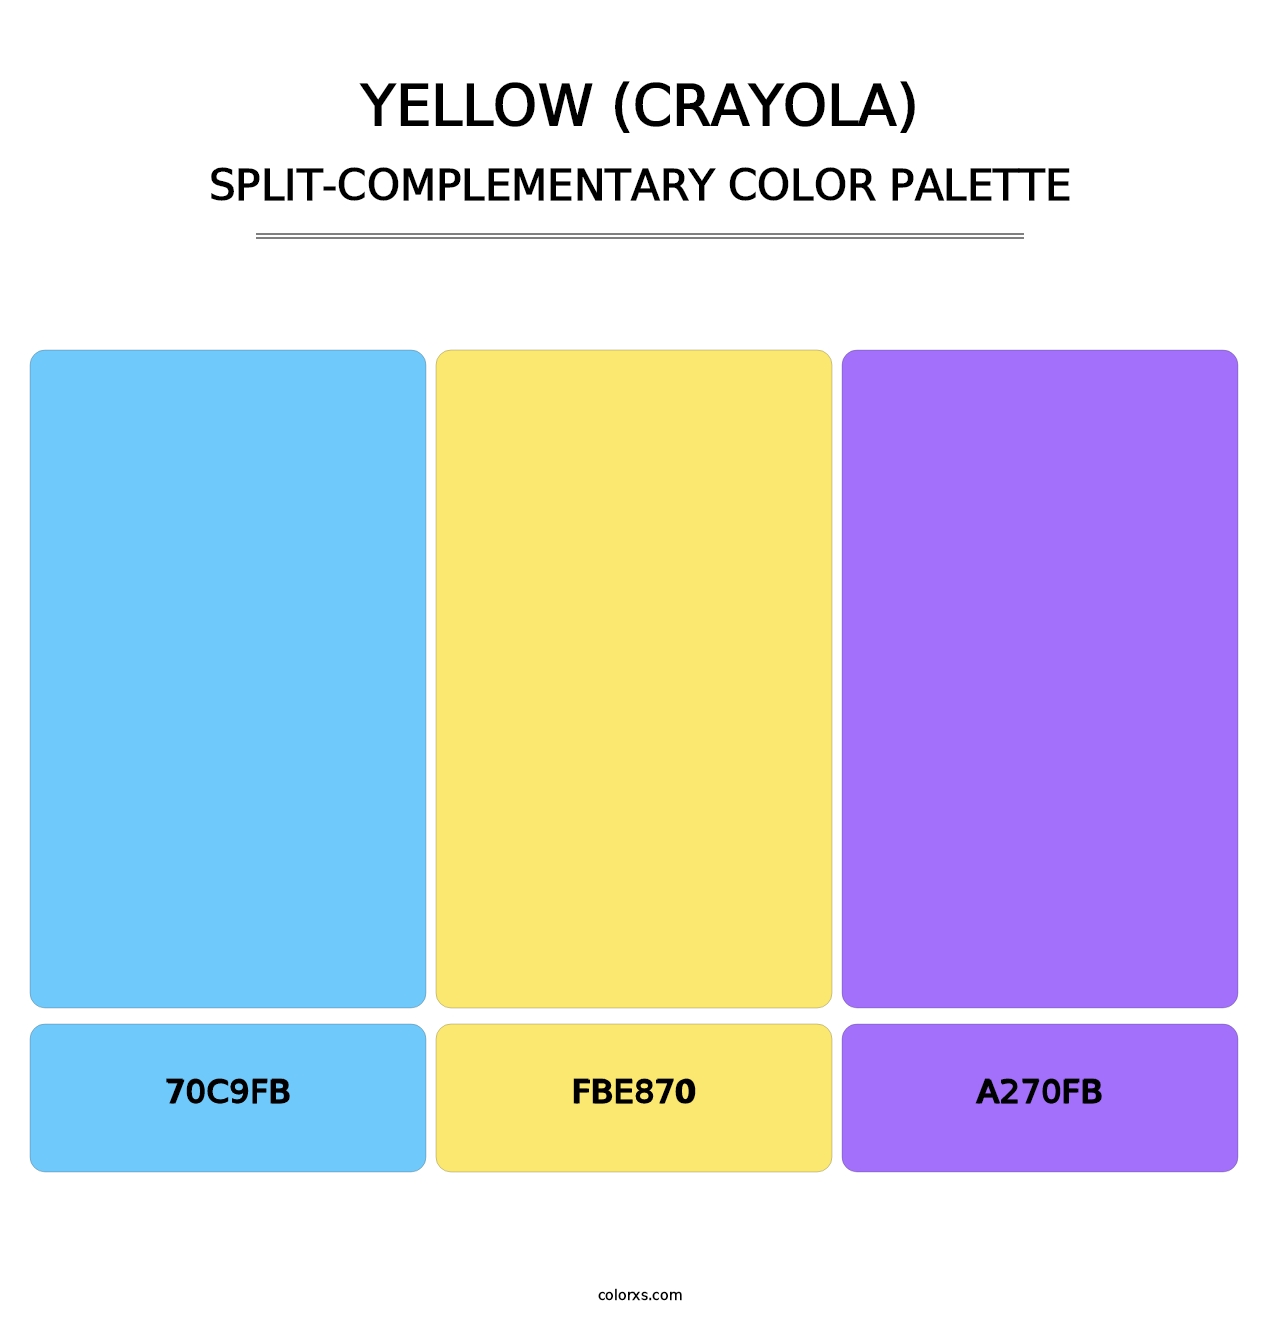 Yellow (Crayola) - Split-Complementary Color Palette